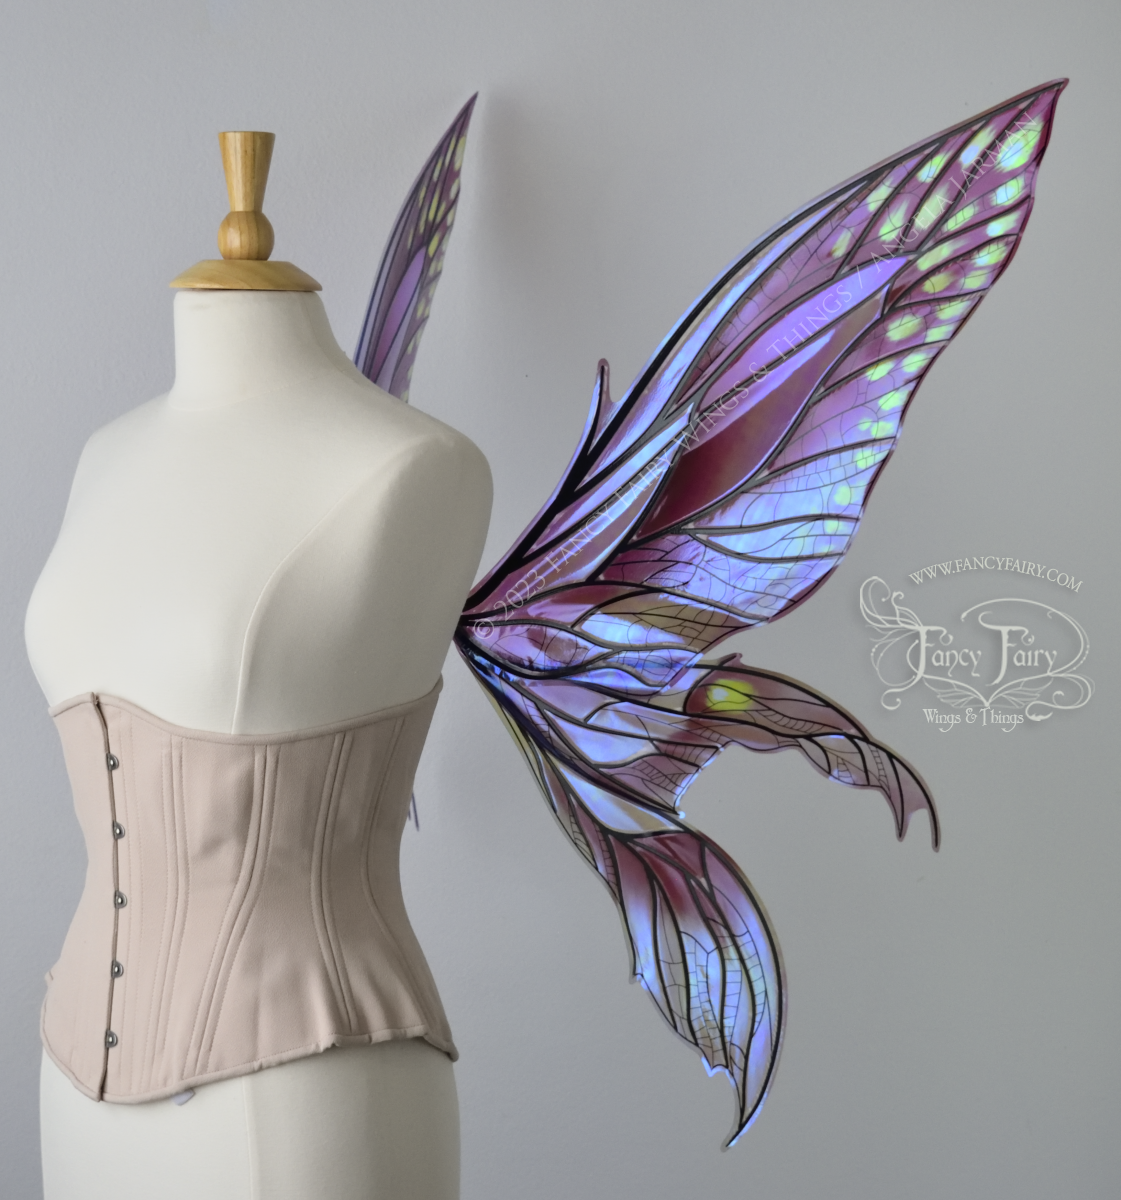 Right side view of dress form wearing large plum iridescent fairy wings with green accents. 3 pointed panels each side, detailed black veins